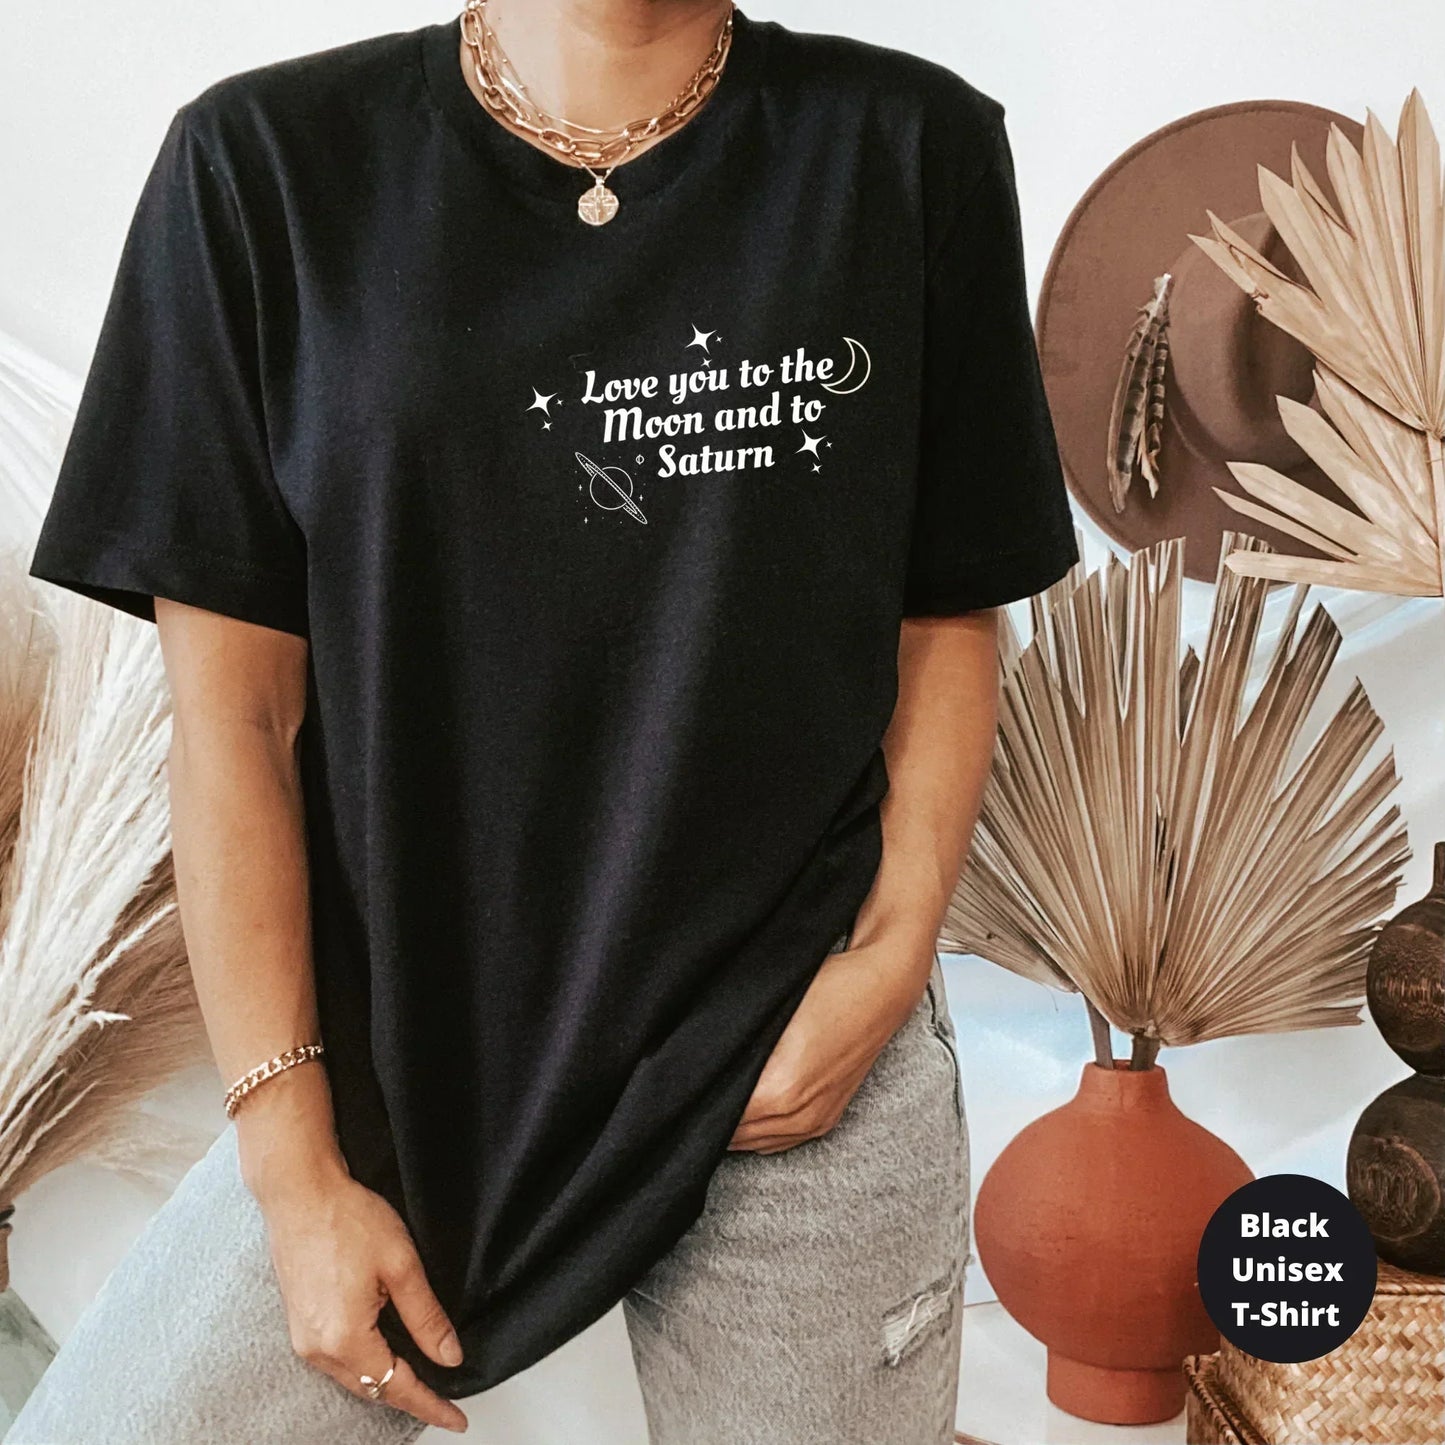 Love You to the Moon and to Saturn T-Shirt | Seven Shirt l Taylor Swift Seven Sweatshirt |Folklore Taylor Swift Inspired Hoodie Gift for Her HMDesignStudioUS